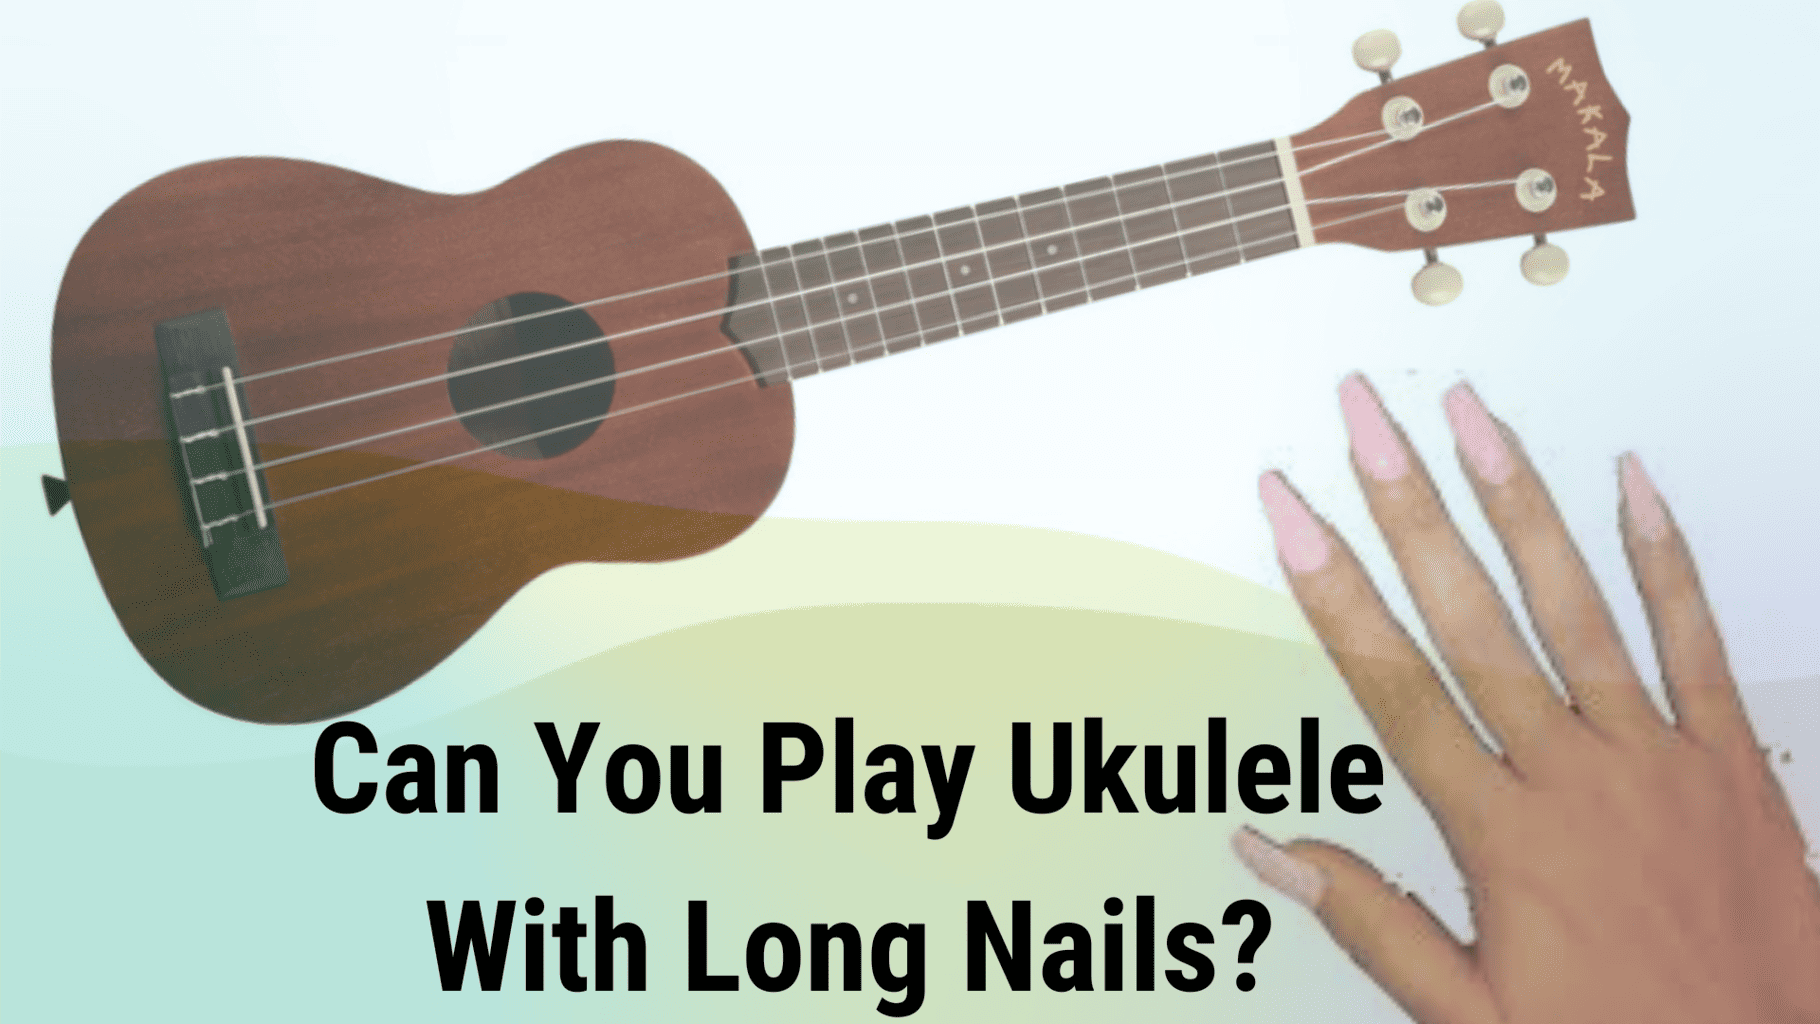 Can you play ukulele with long nails?